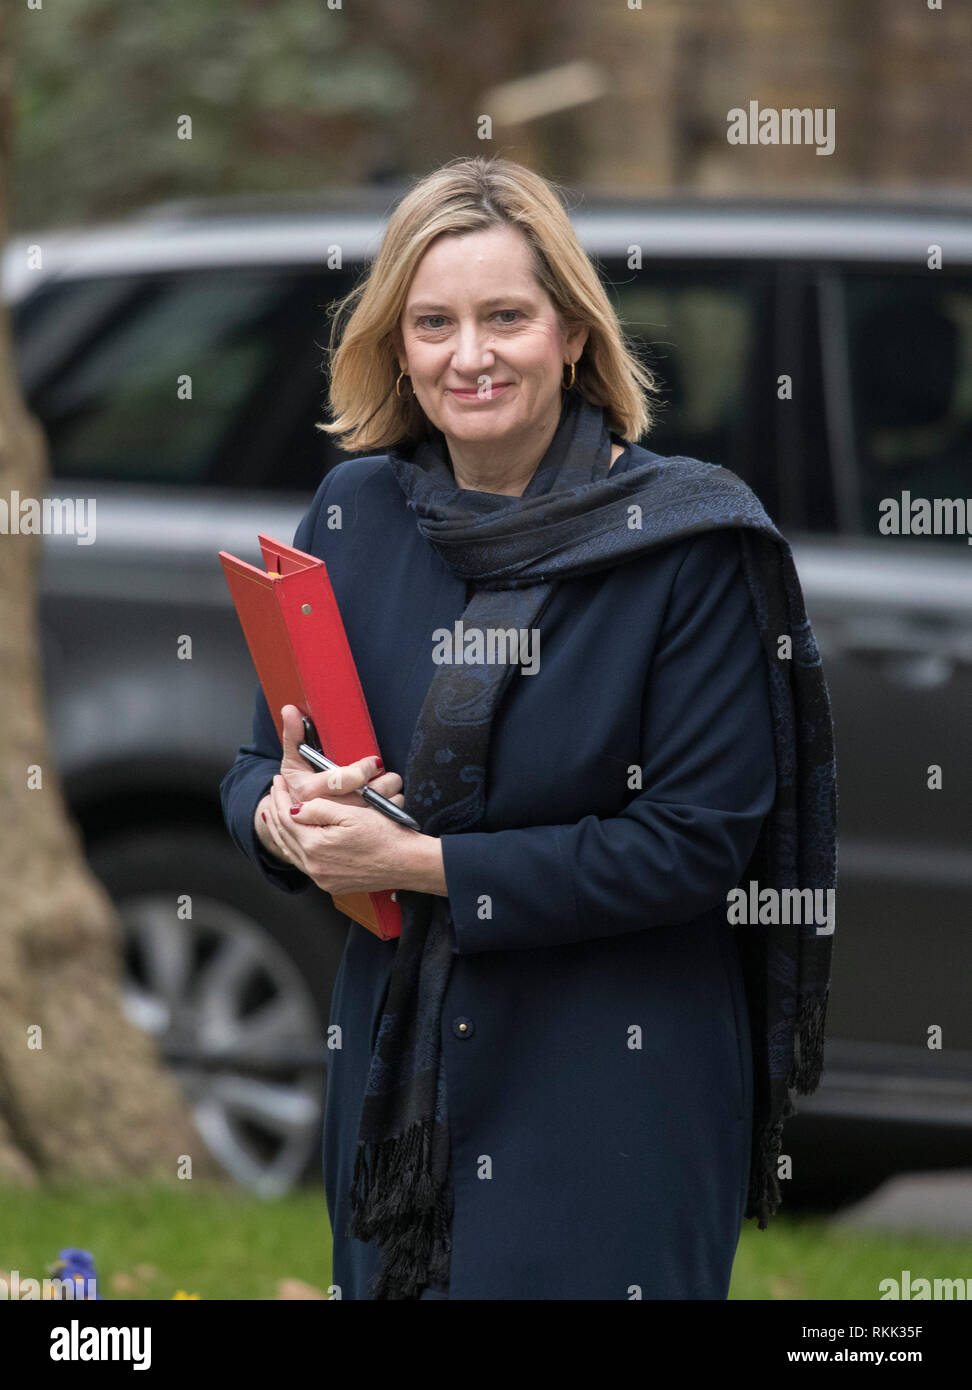 Downing Street, London, UK. 12 February 2019. Government Ministers arrive in Downing Street for weekly cabinet meeting. Amber Rudd, Secretary of State for Work and Pensions. Credit: Malcolm Park/Alamy Live News. Stock Photo